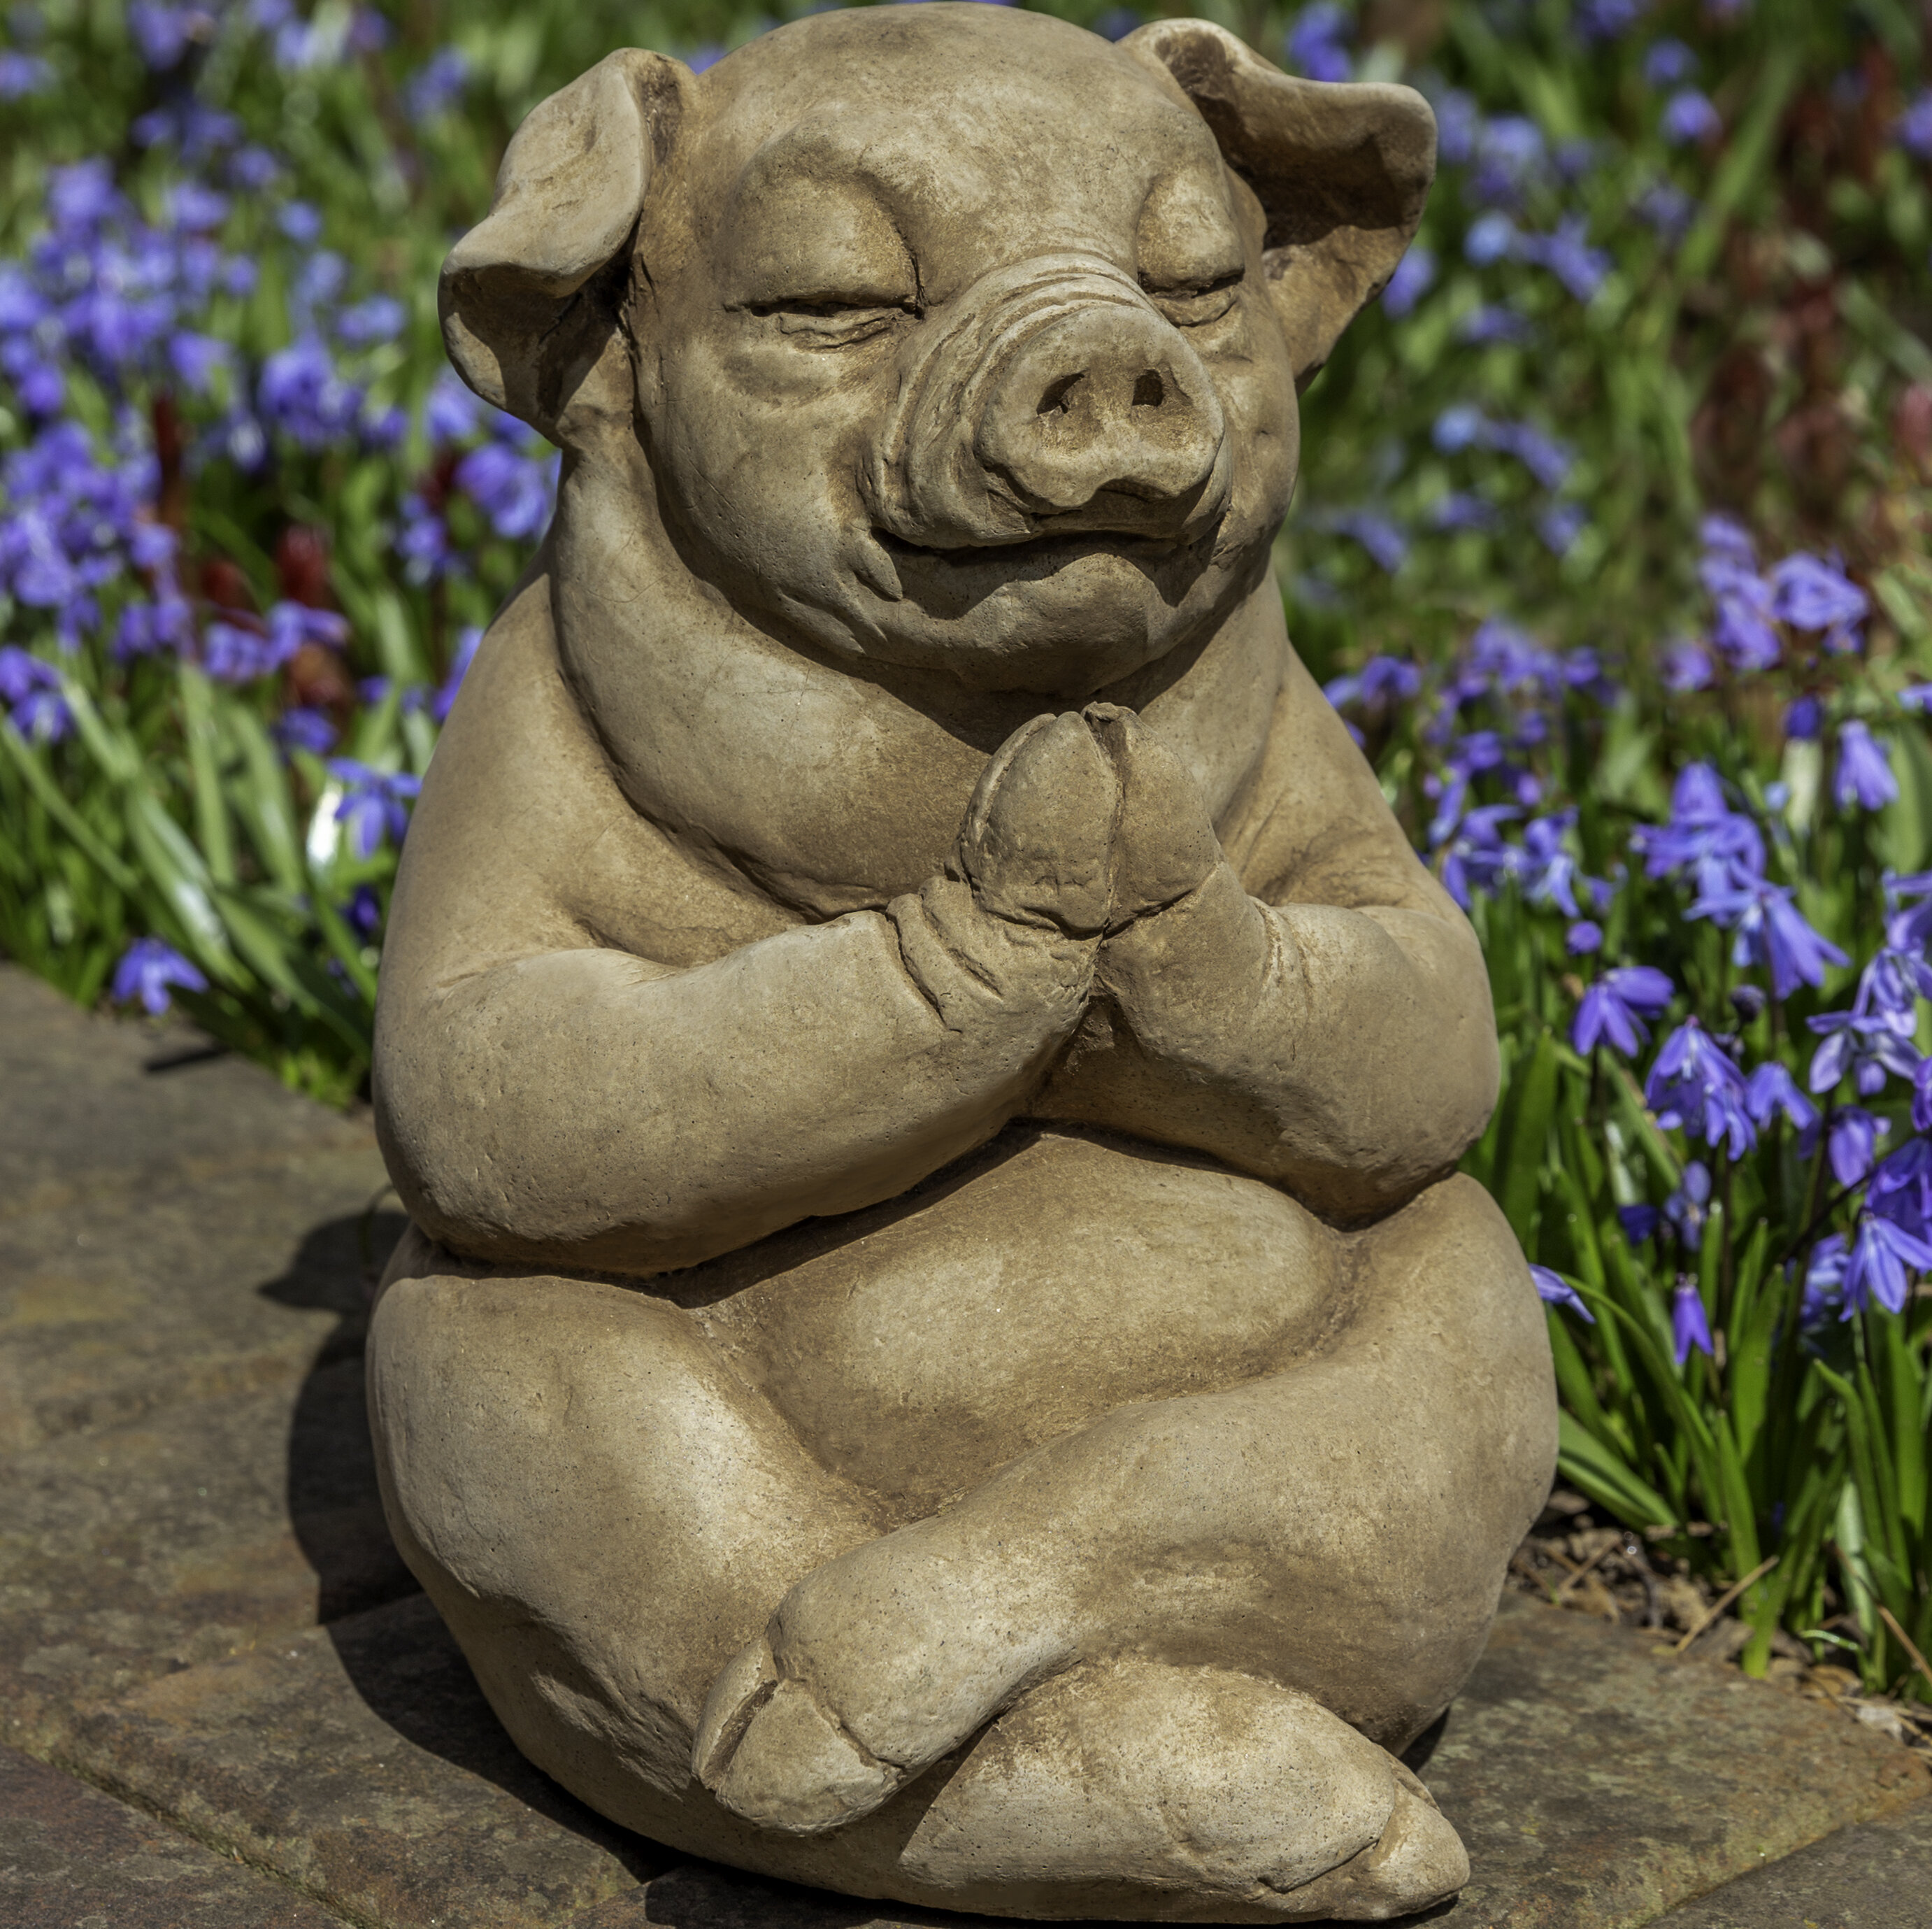 Pig Animals Miniature Outdoor Ornaments & Statues for sale